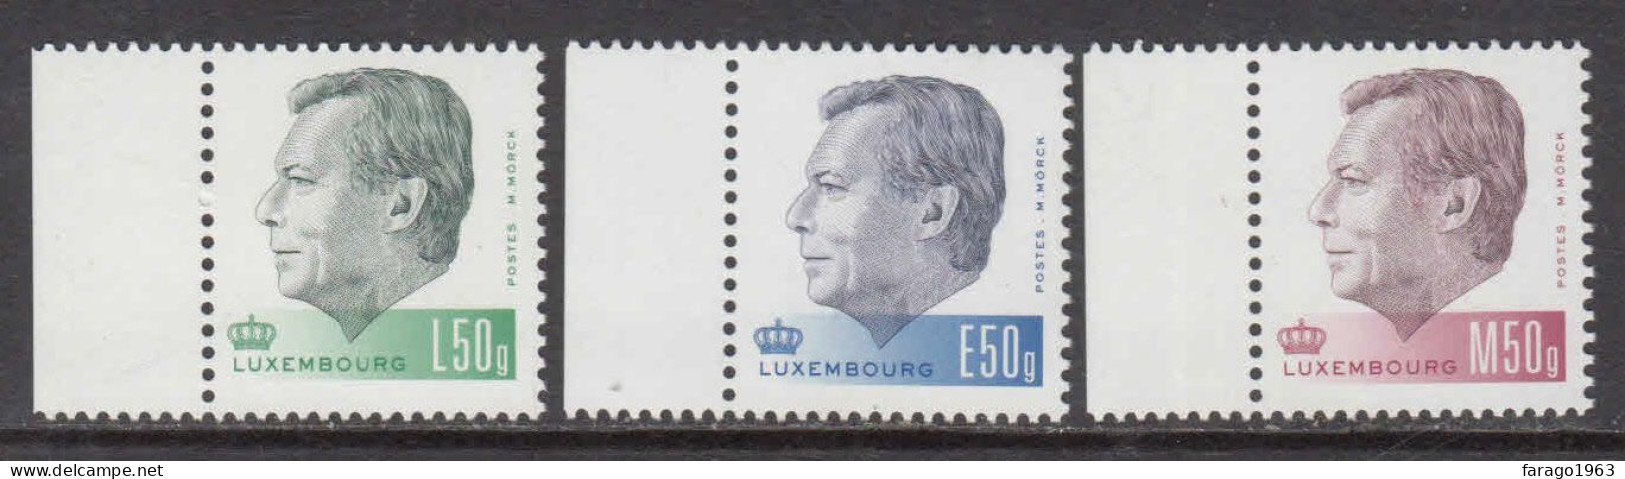 2015 Luxembourg Definitives Complete Set Of 3 MNH @ BELOW FACE VALUE - Unused Stamps